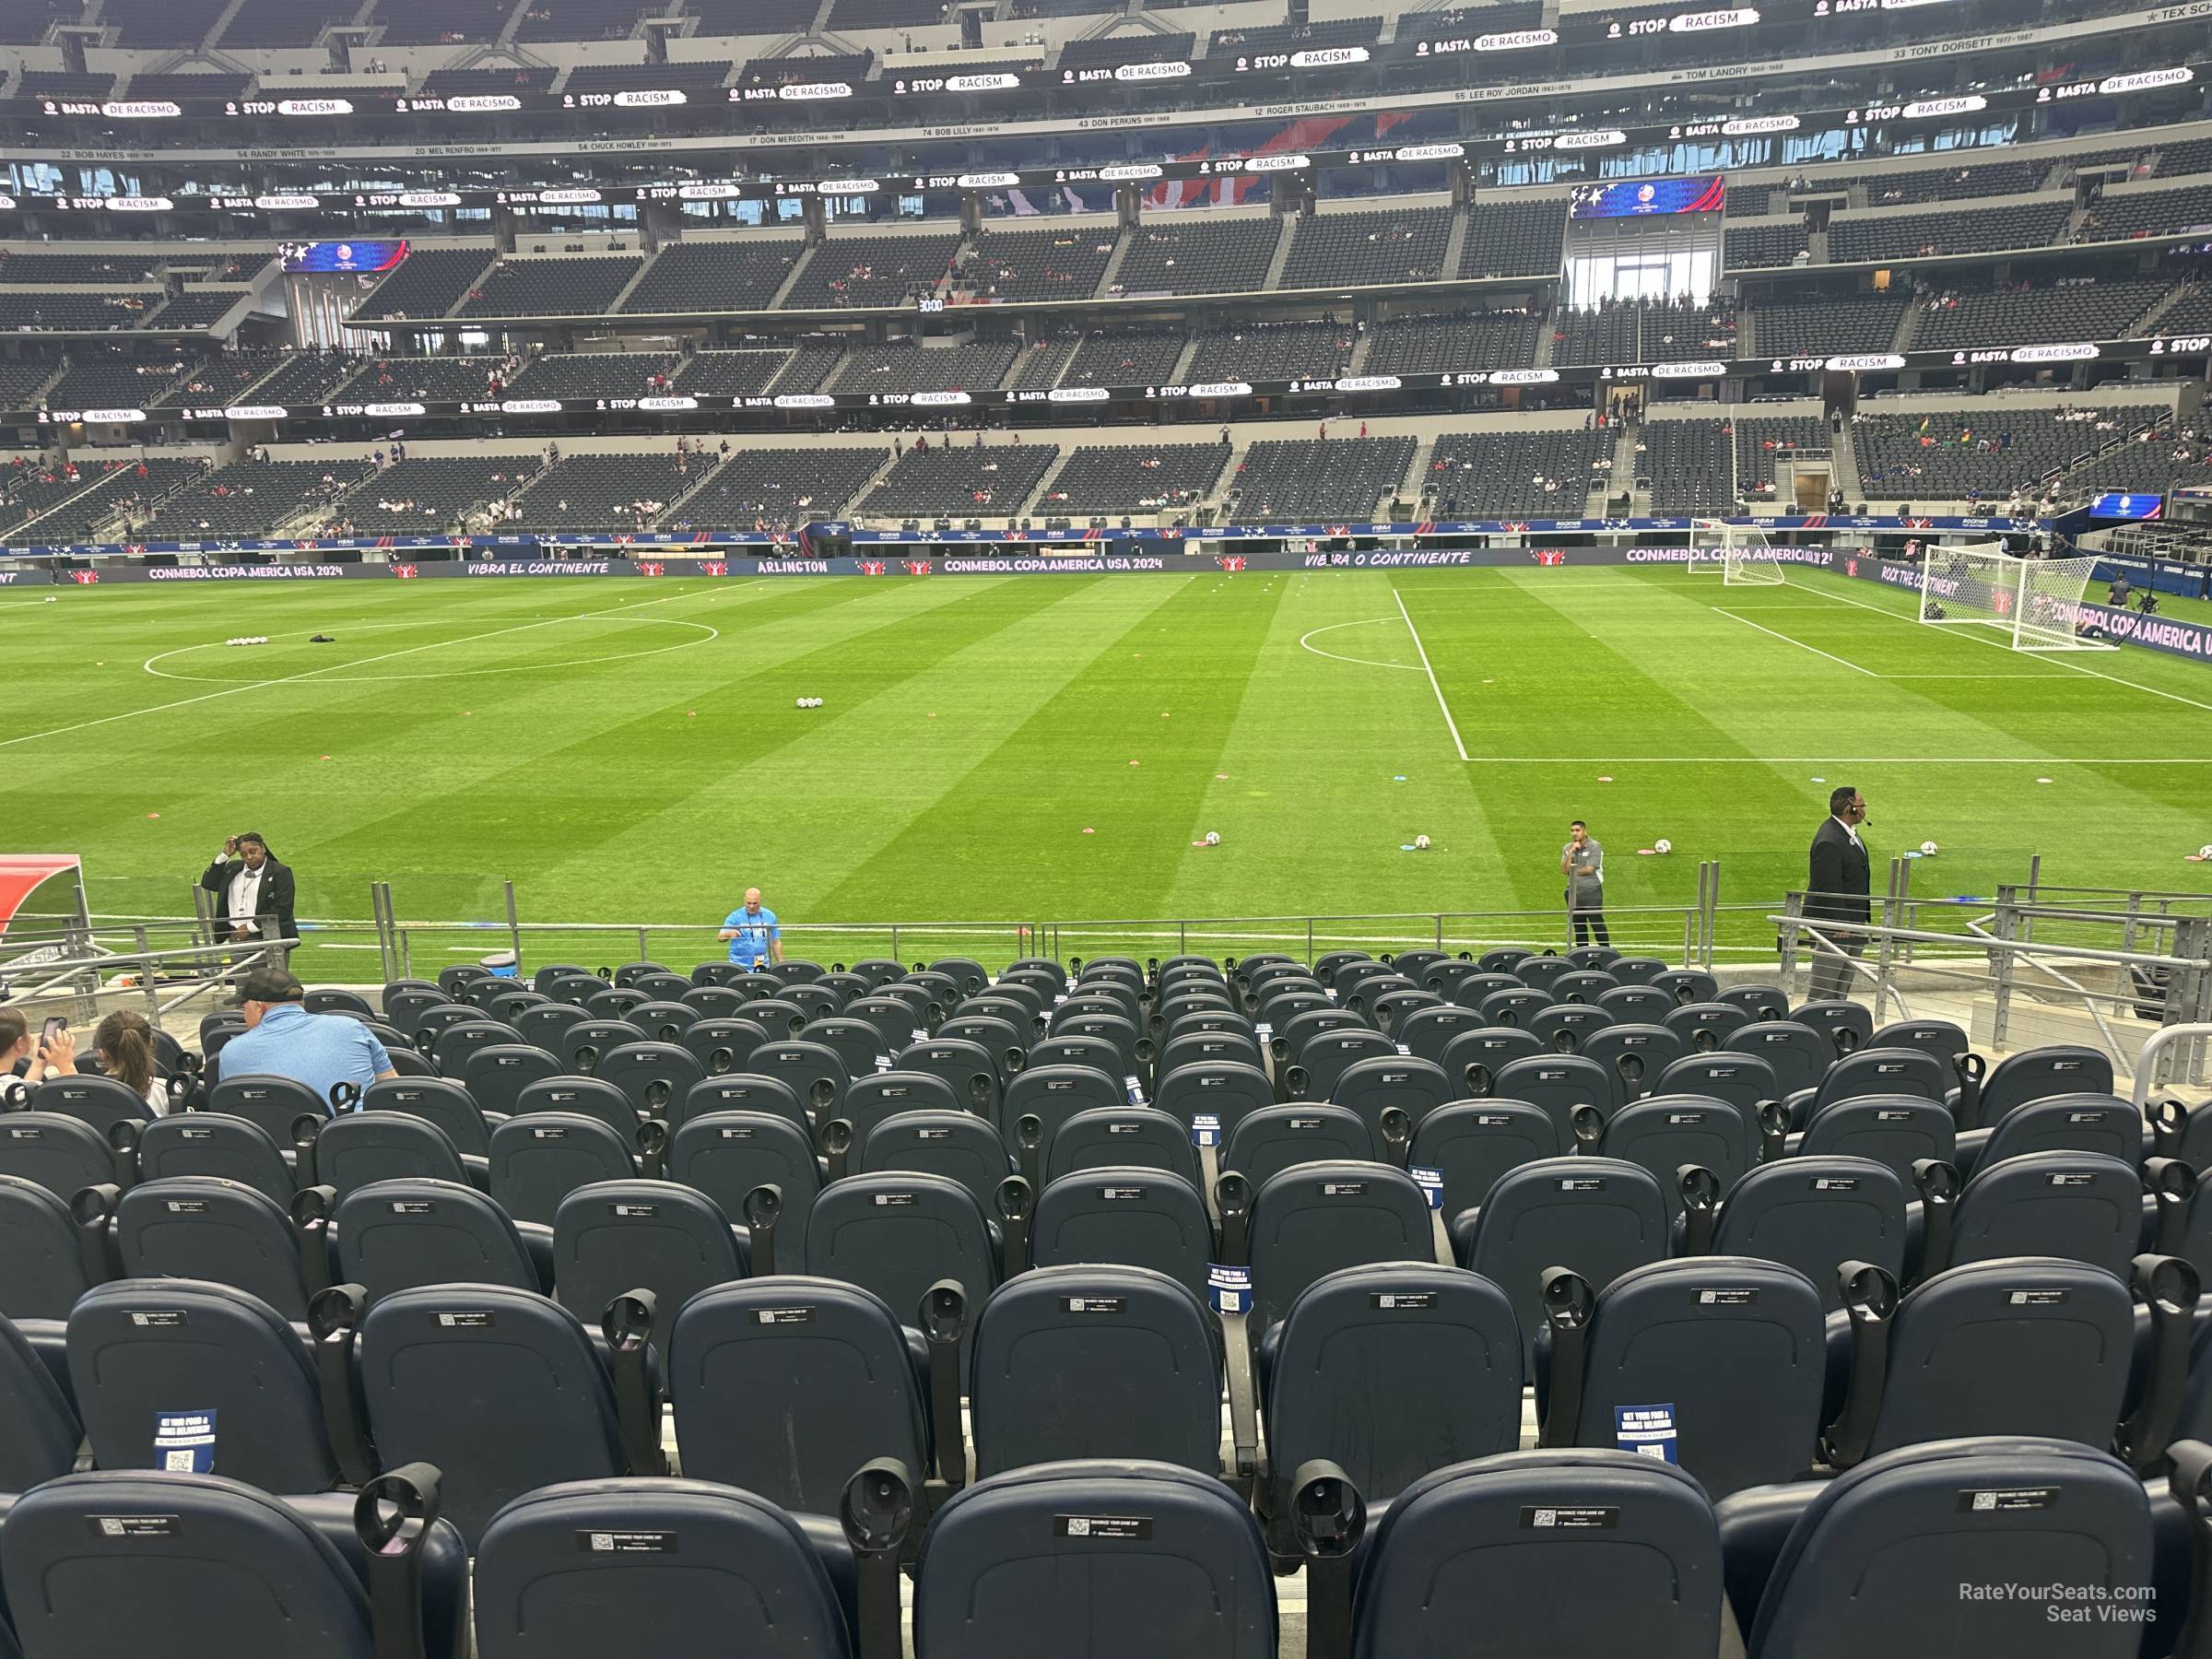 section c133, row 14 seat view  for soccer - at&t stadium (cowboys stadium)